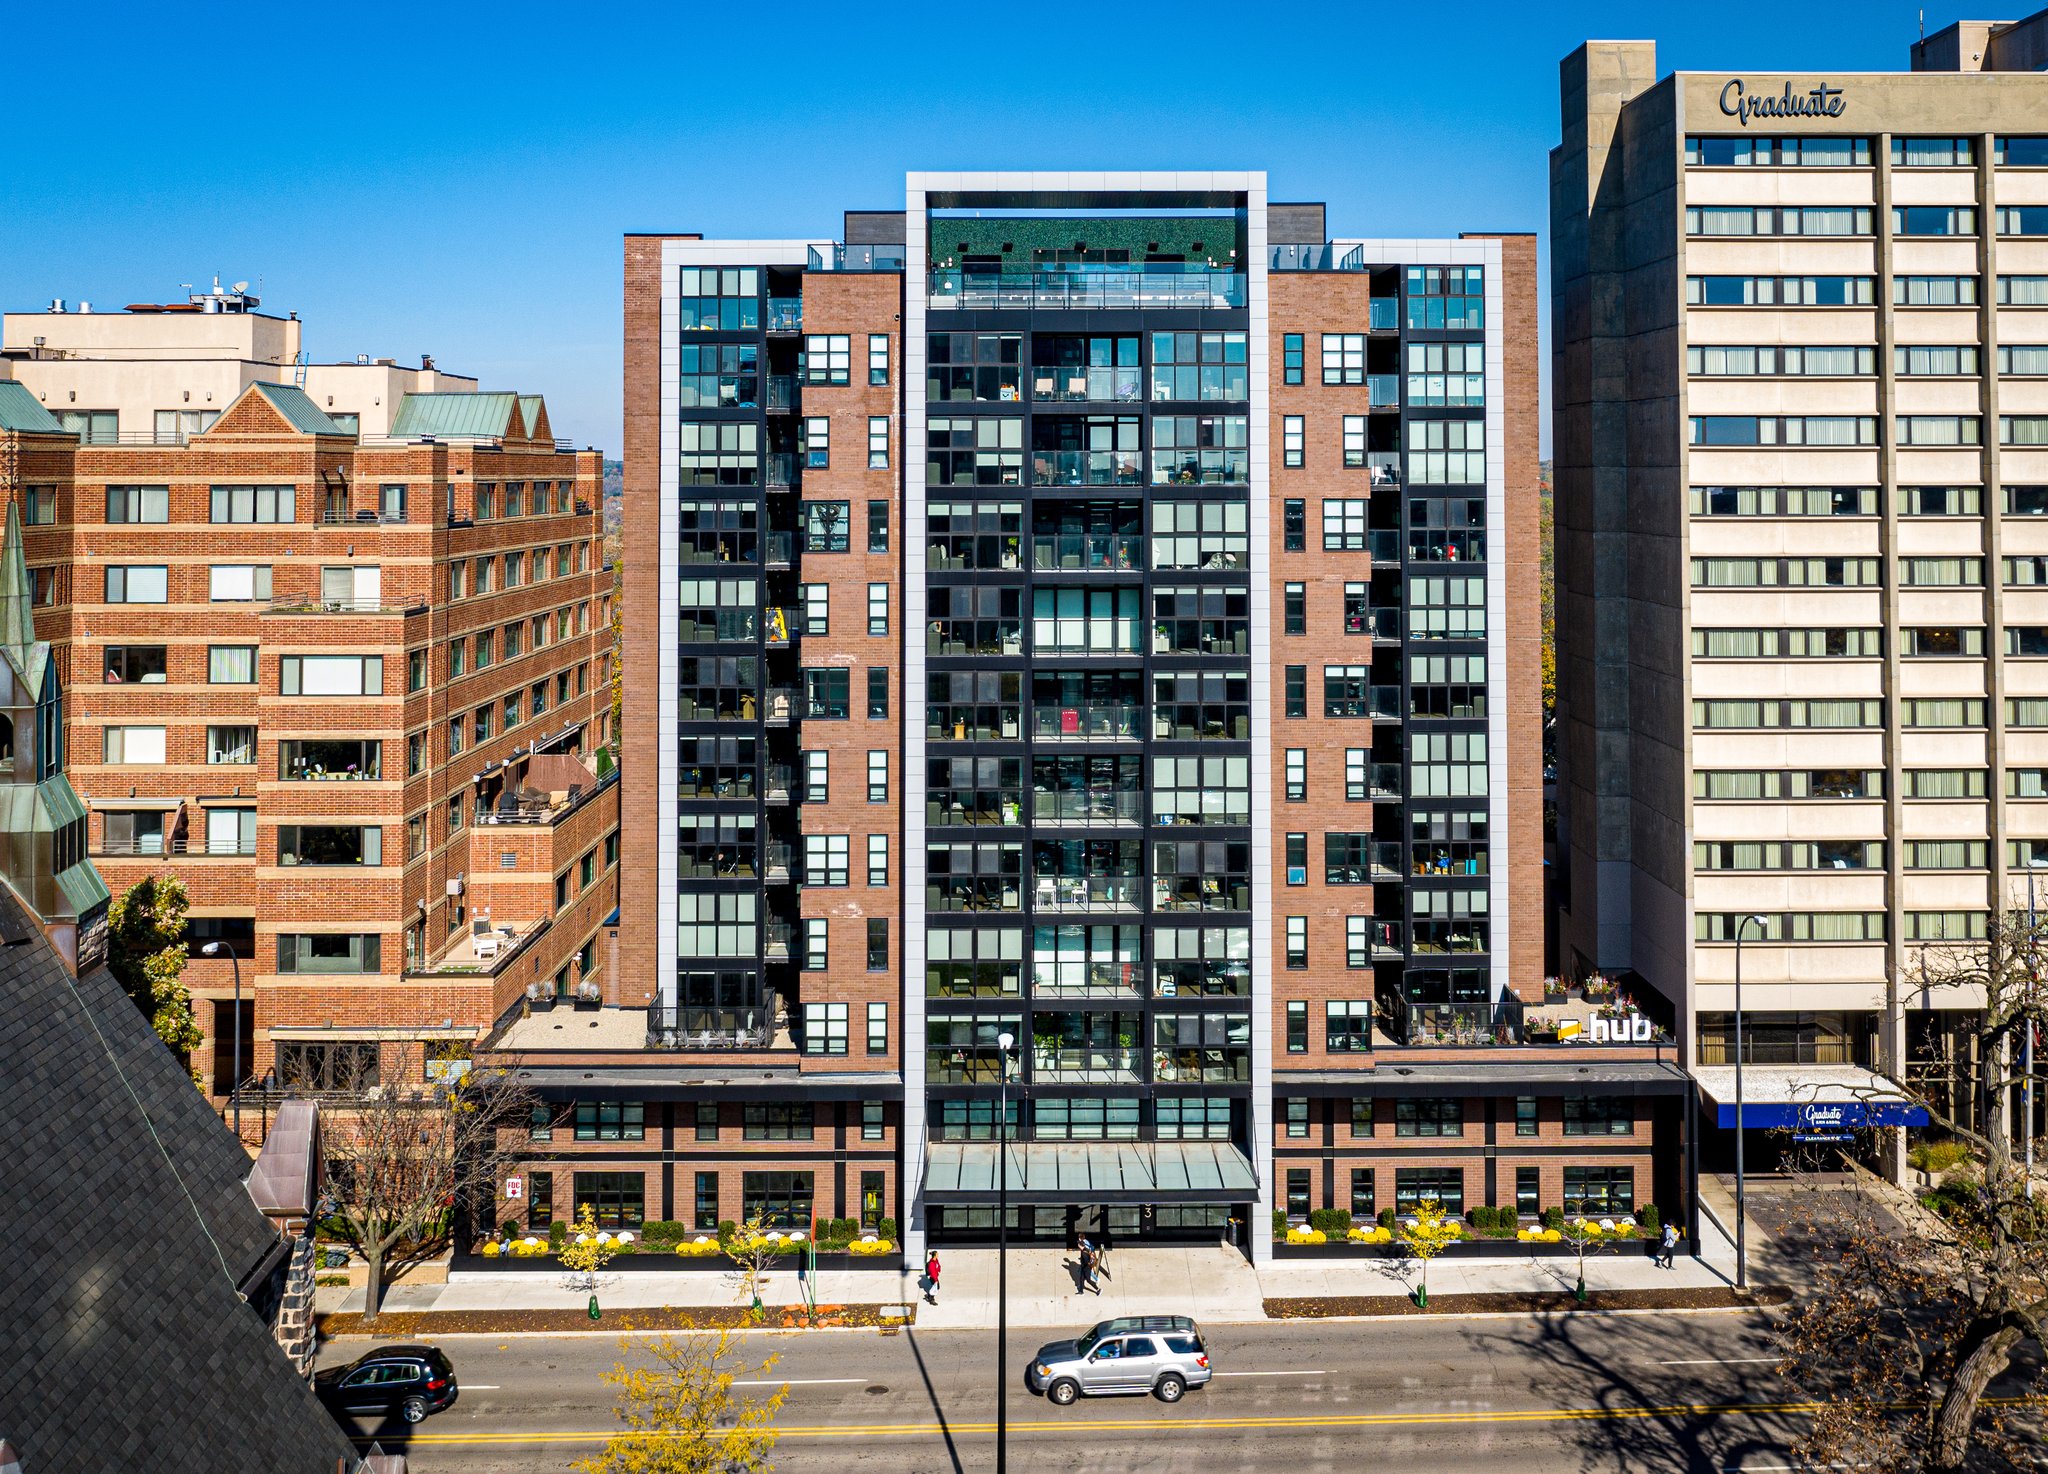 Welcome to Sloan Plaza condos in Ann Arbor